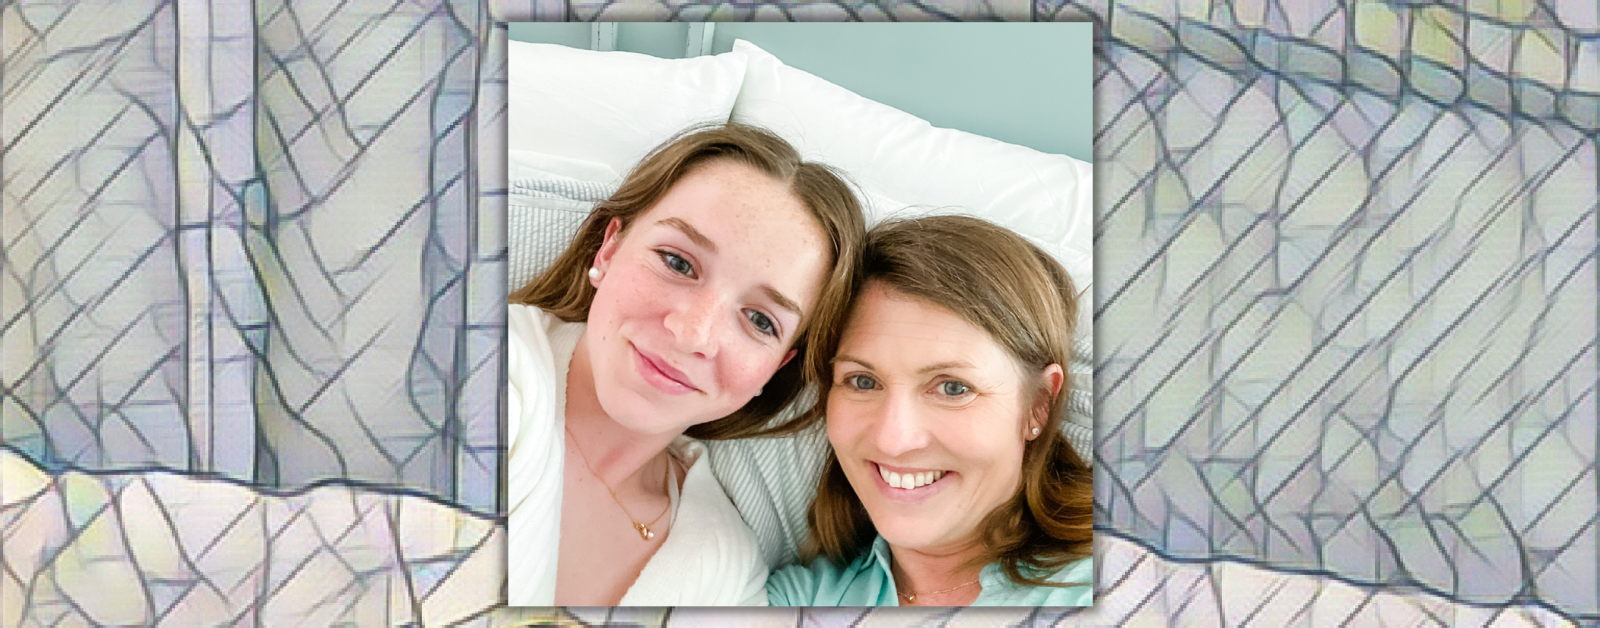 Marilee and Amy Julia smile at the camera for a selfie as they rest in bed